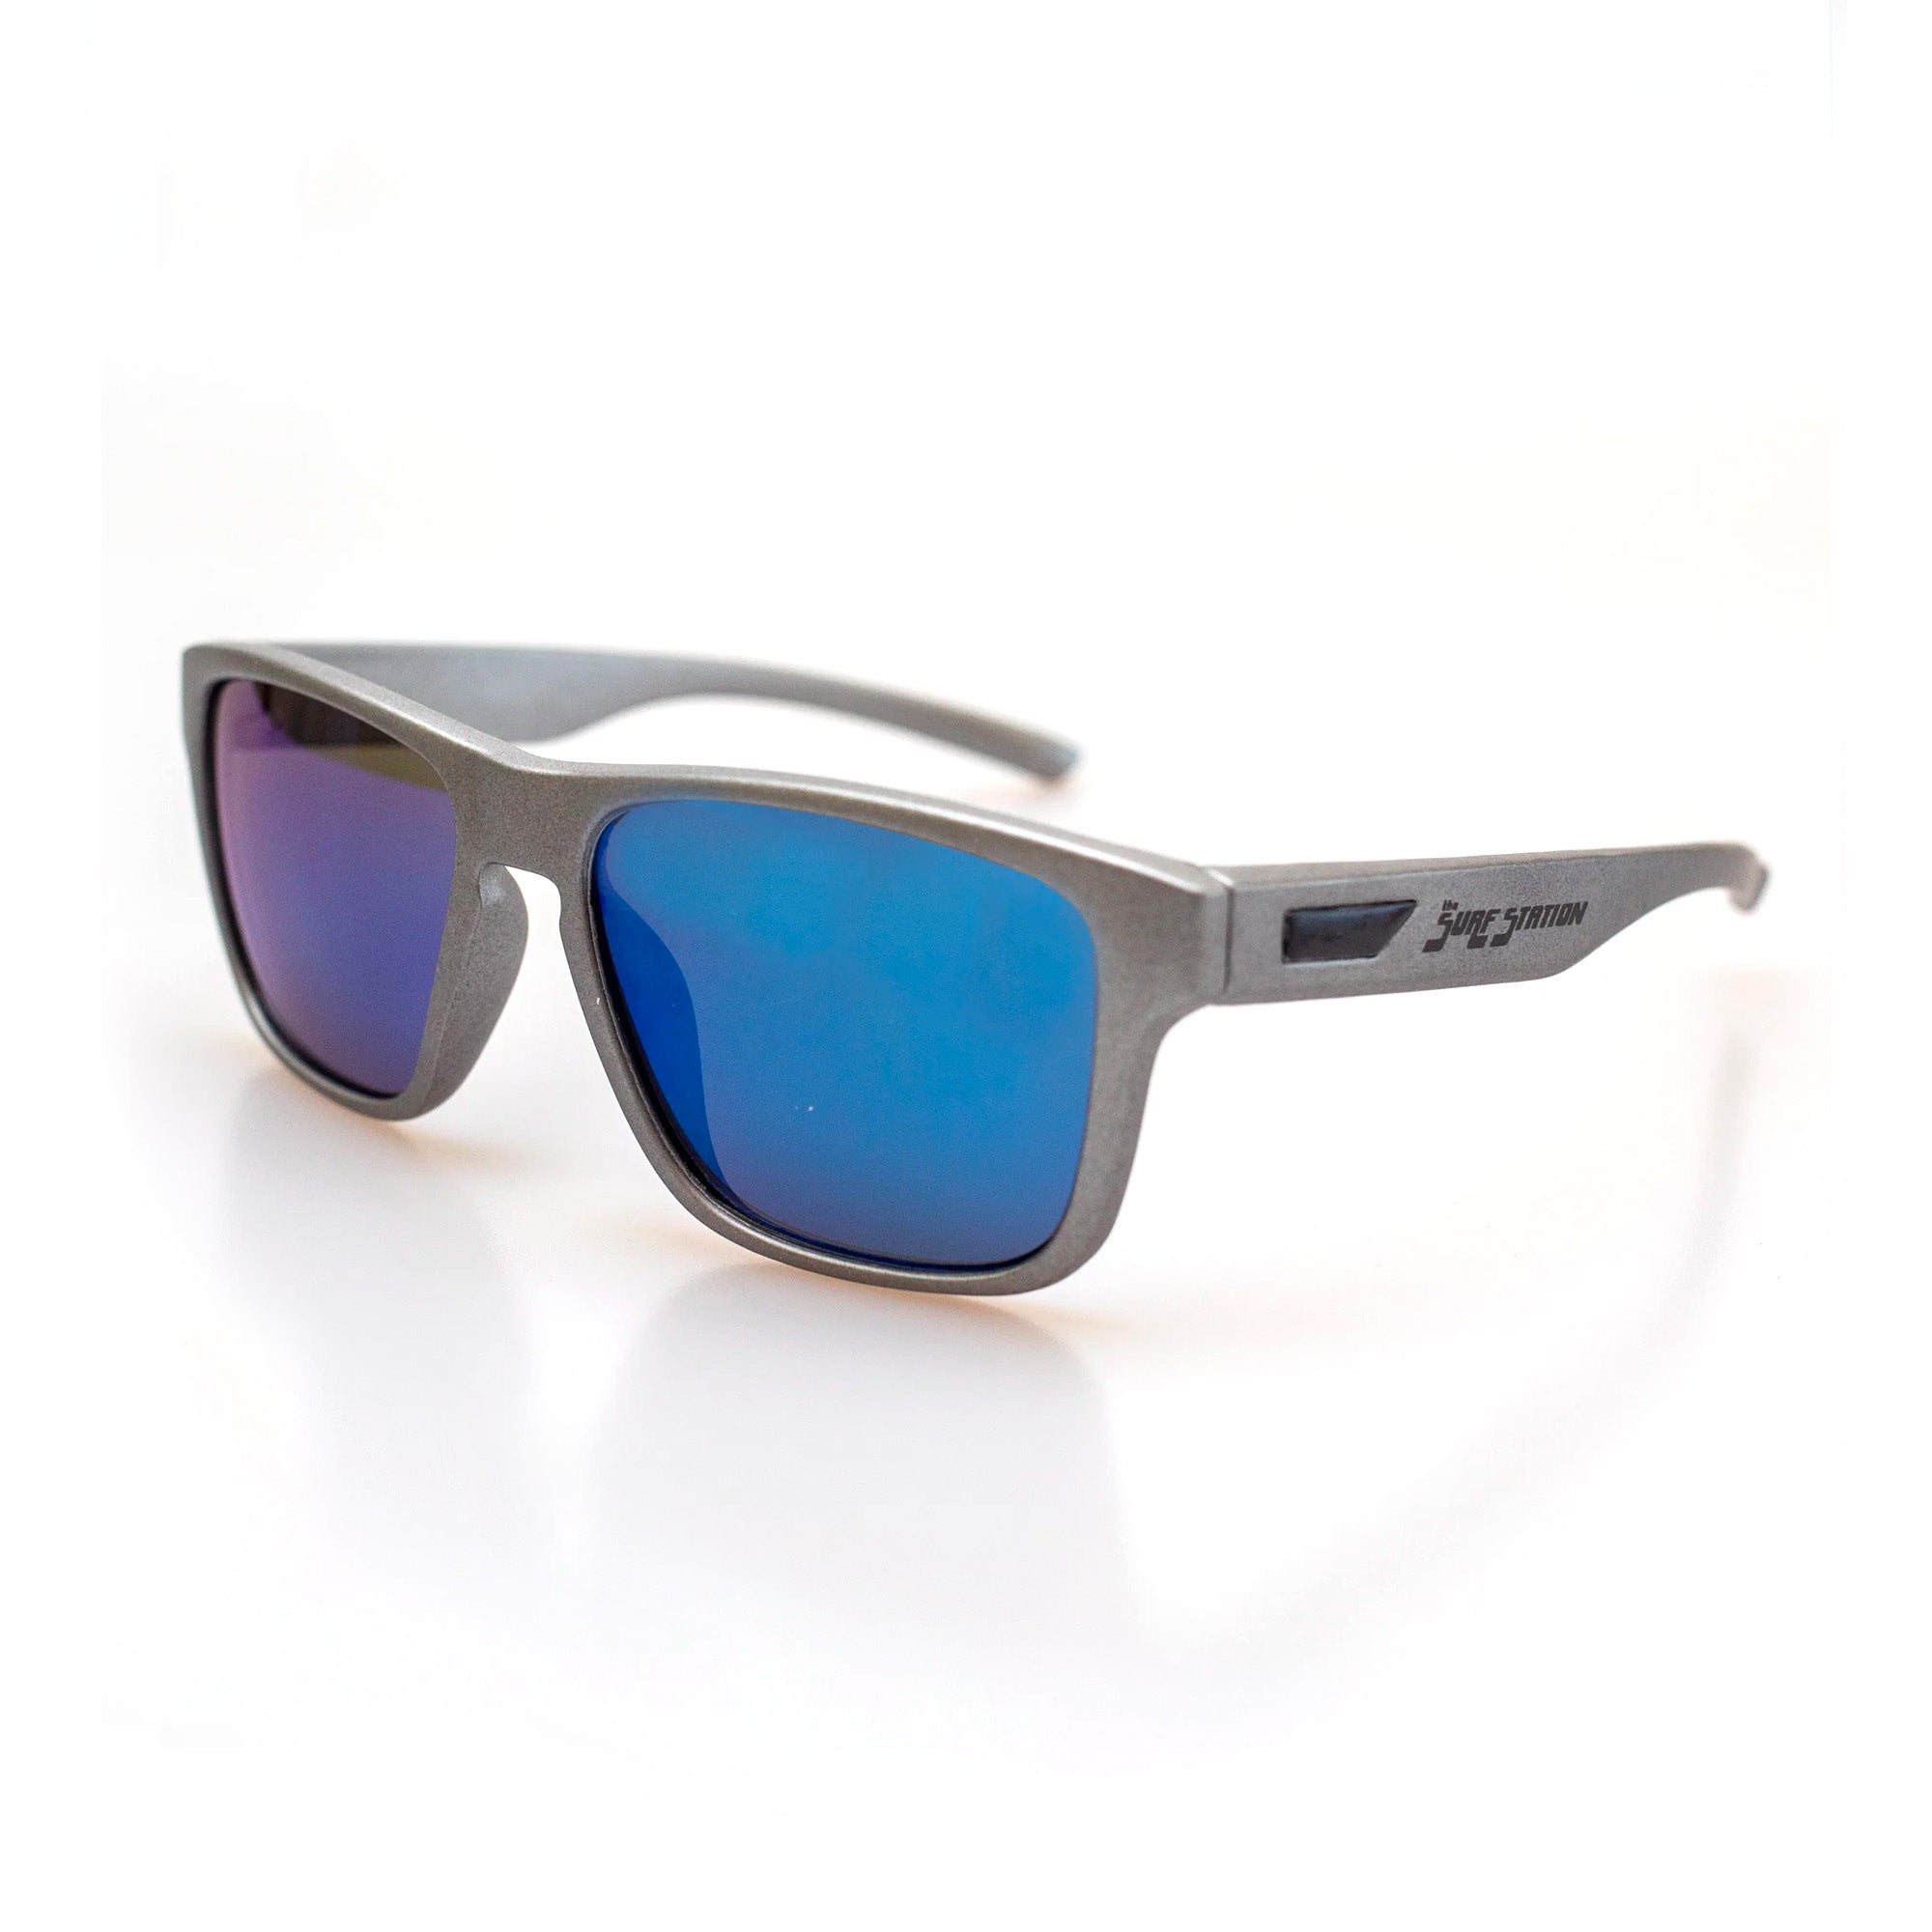 Surf Station Daily Driver Men's Polarized Sunglasses